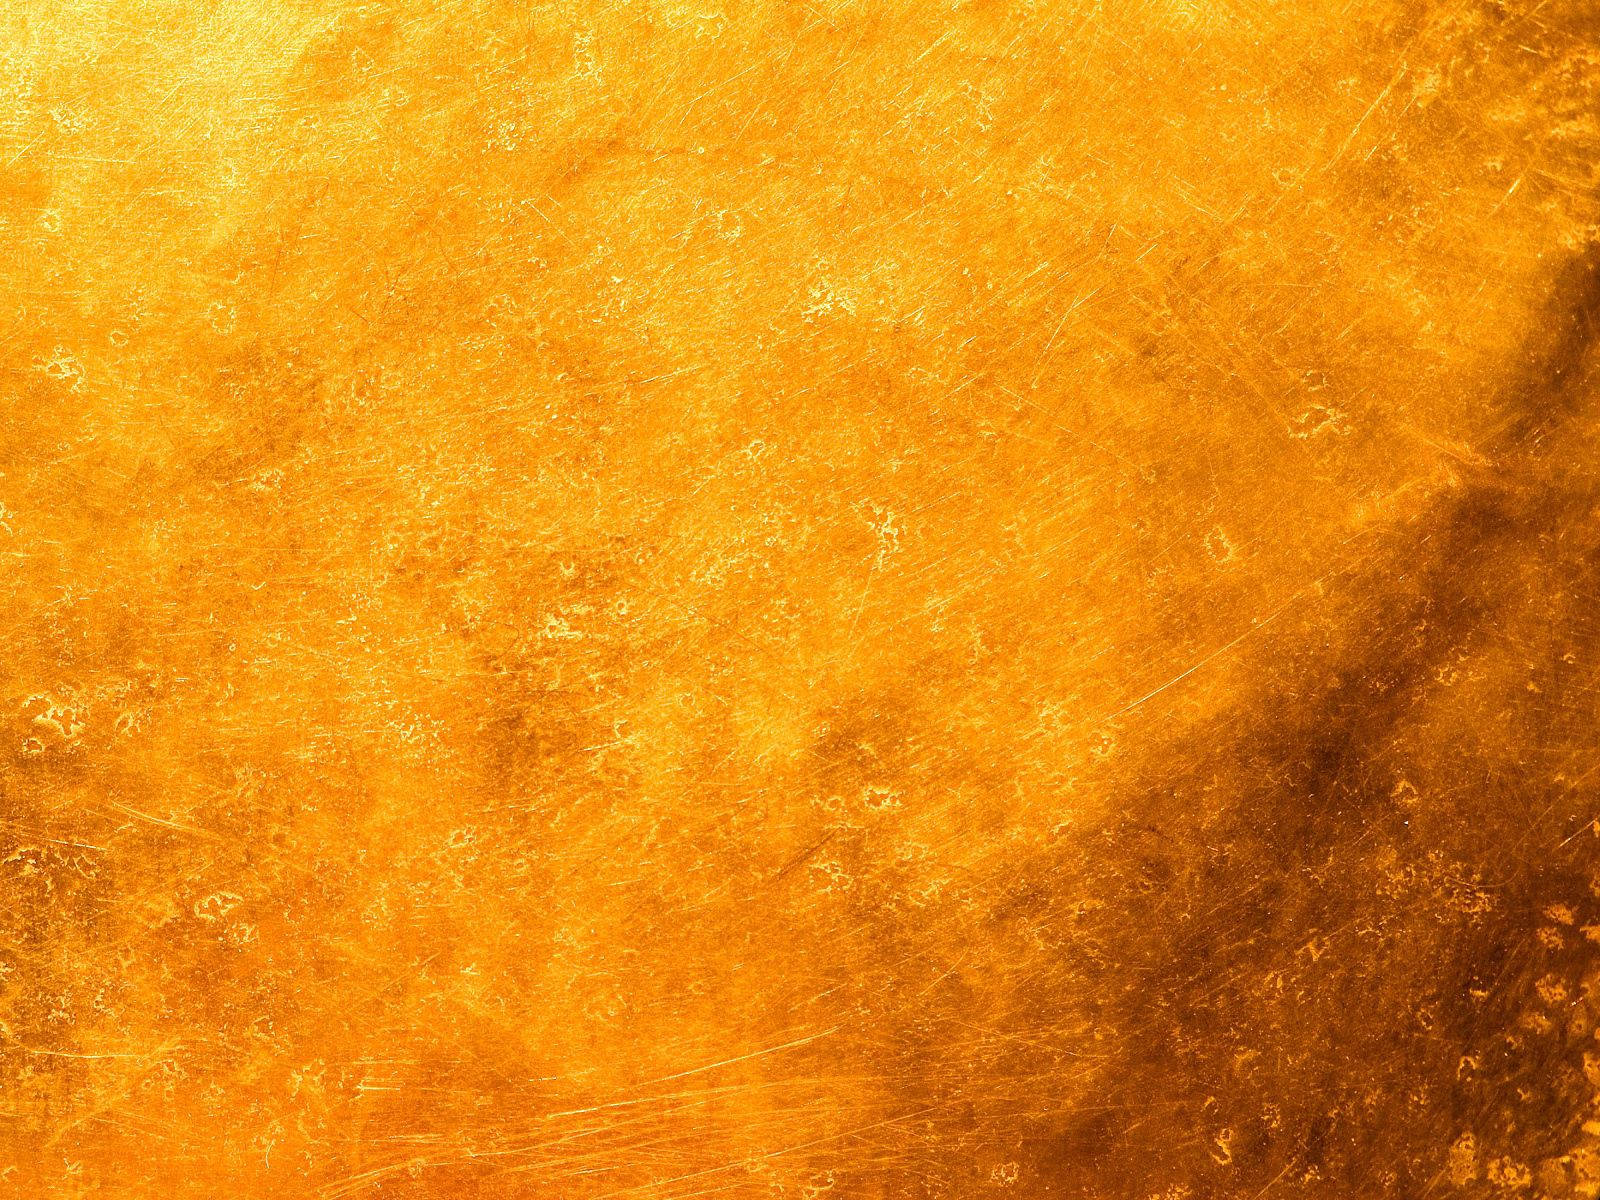 Yellow stains with scratches and spots on textured background.